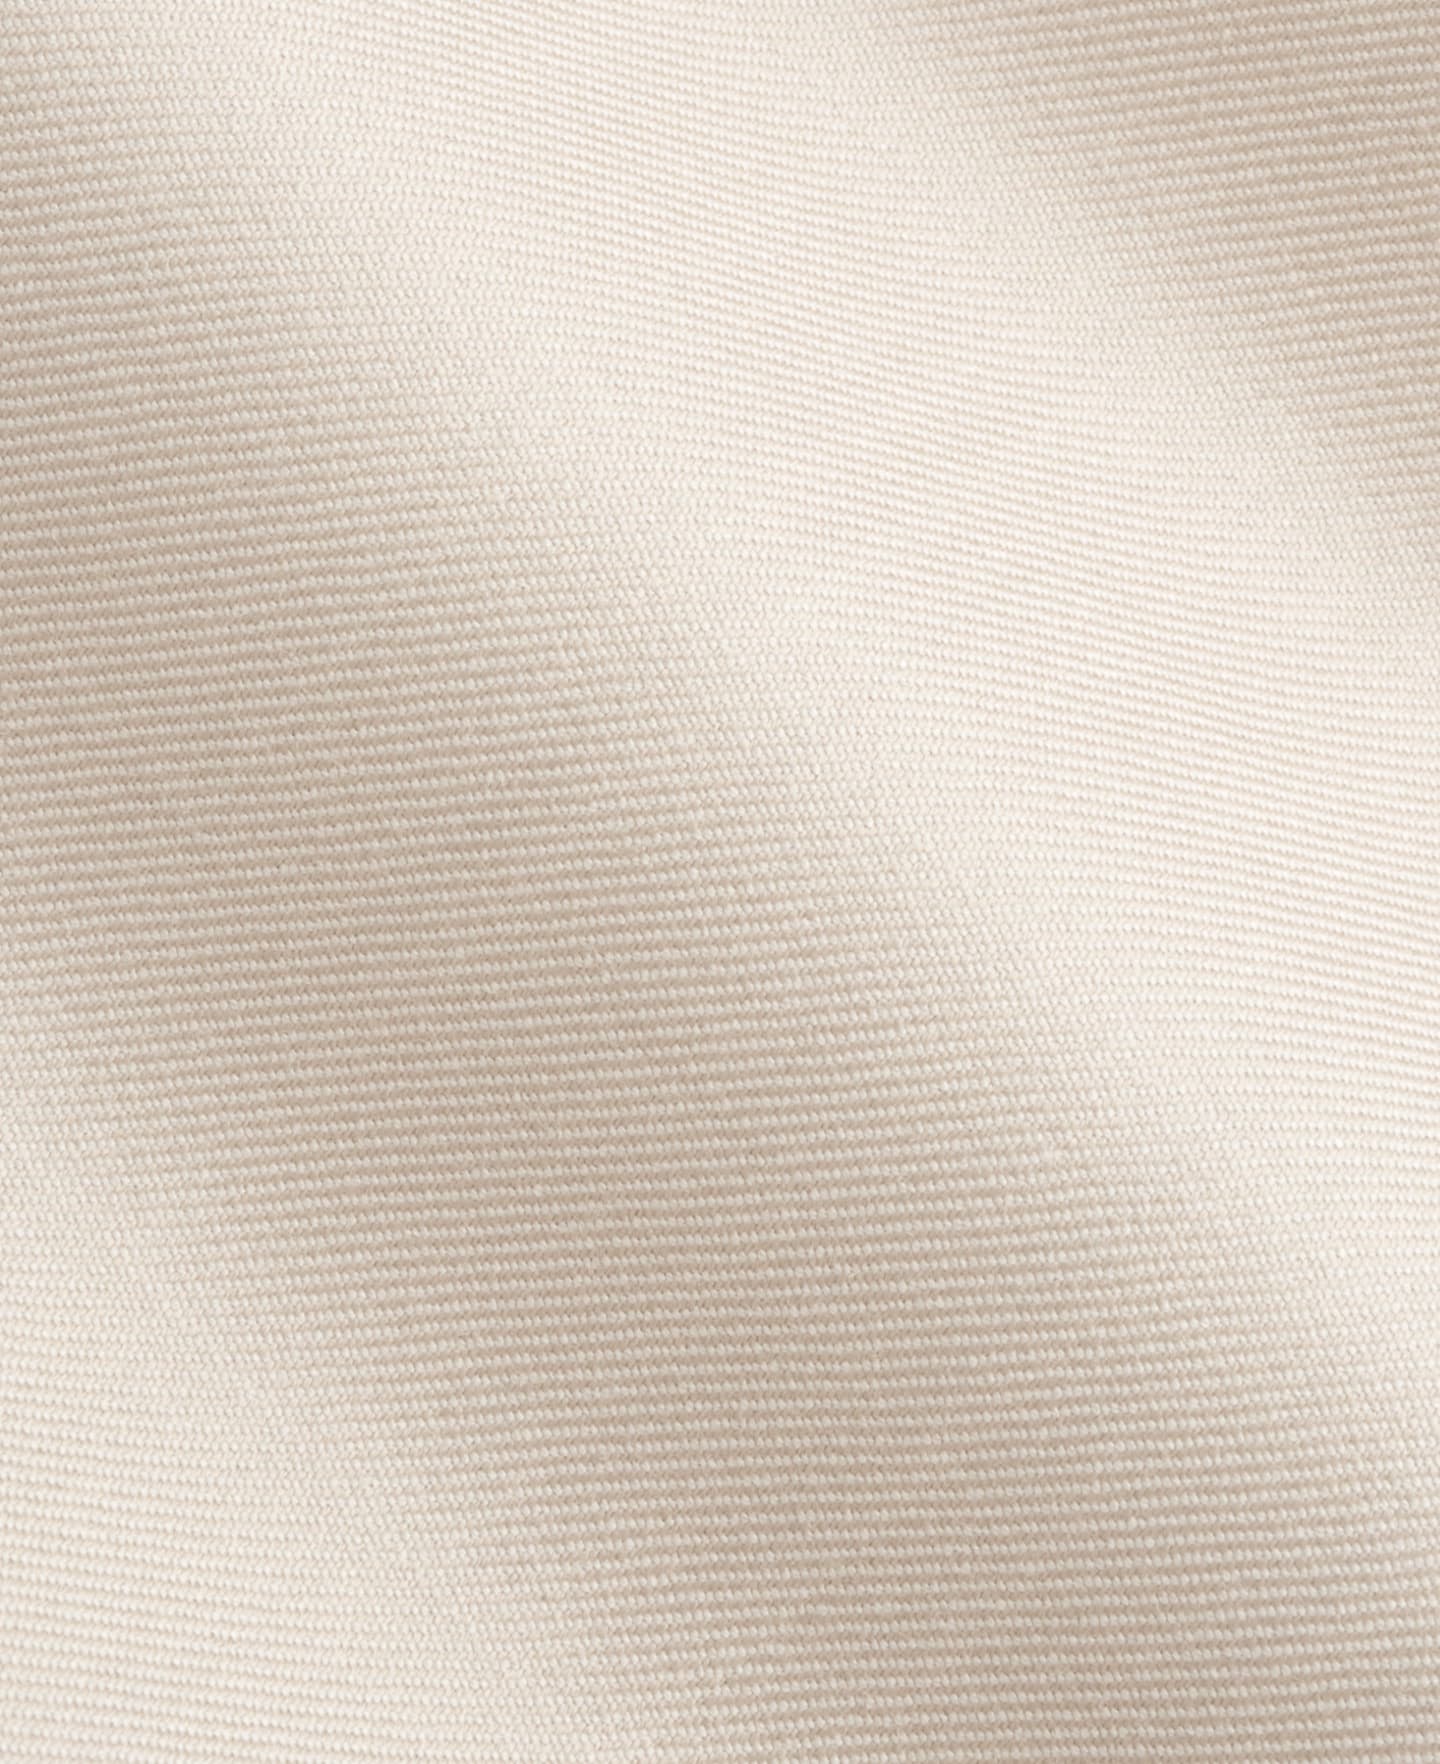 Detail of pure S180's wool fabric